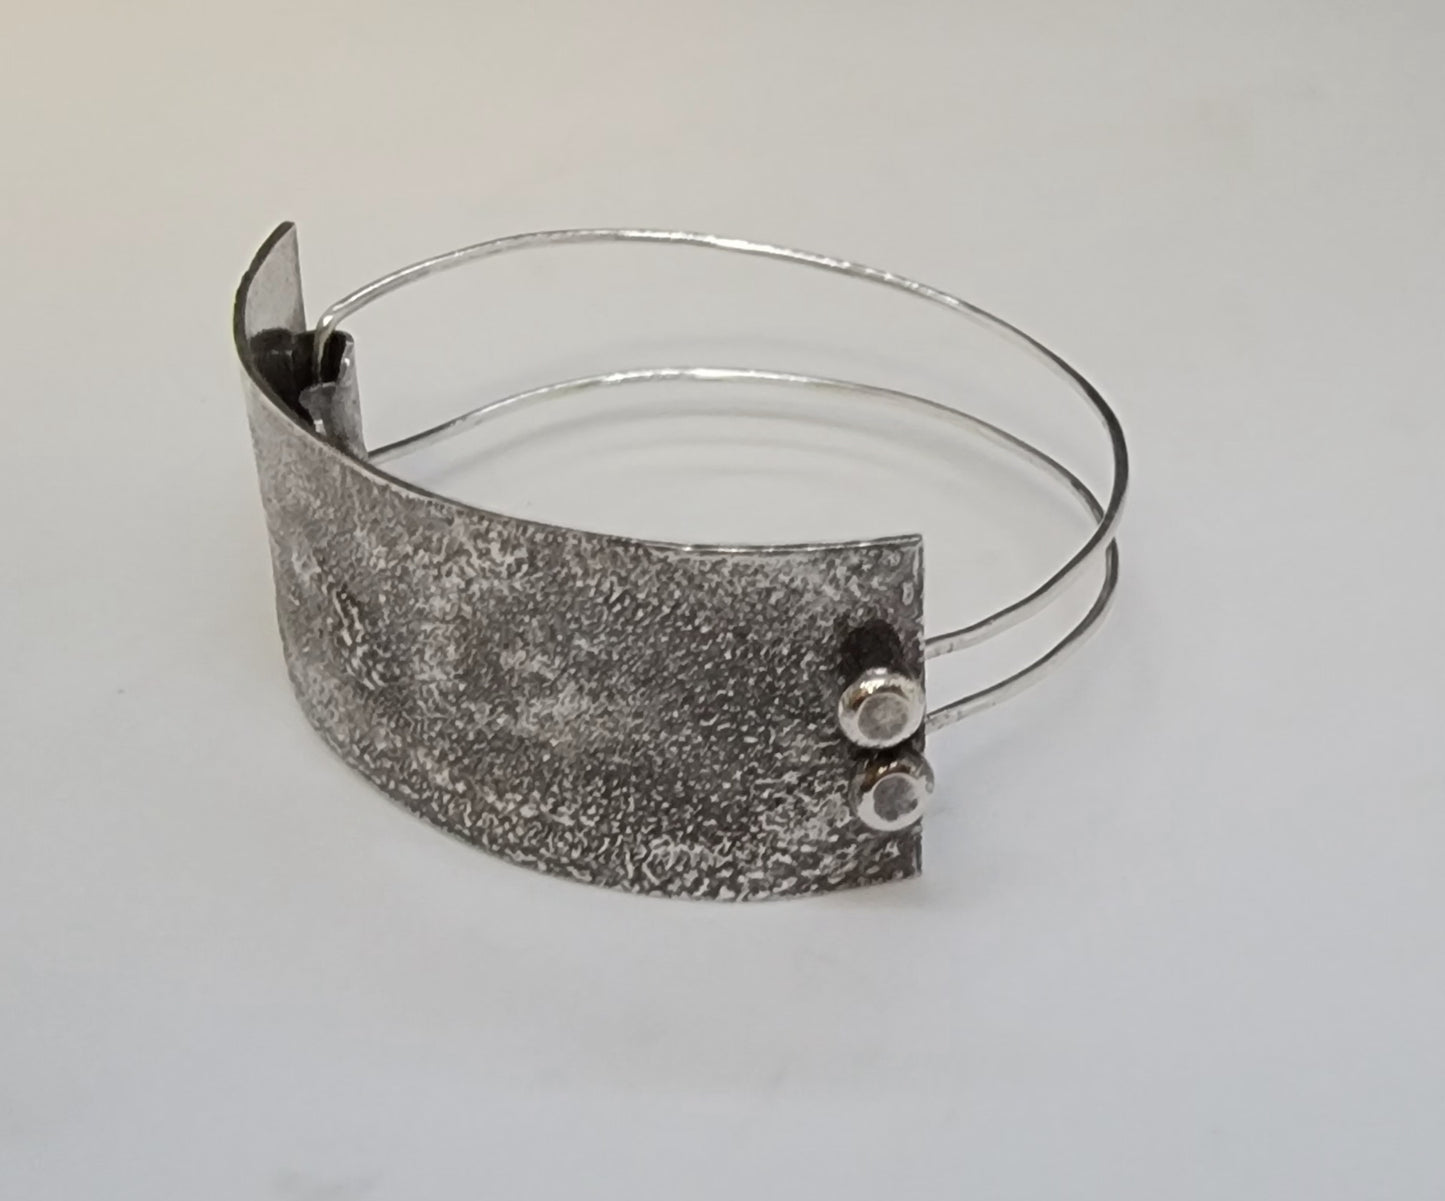 Reticulated Silver Bracelet